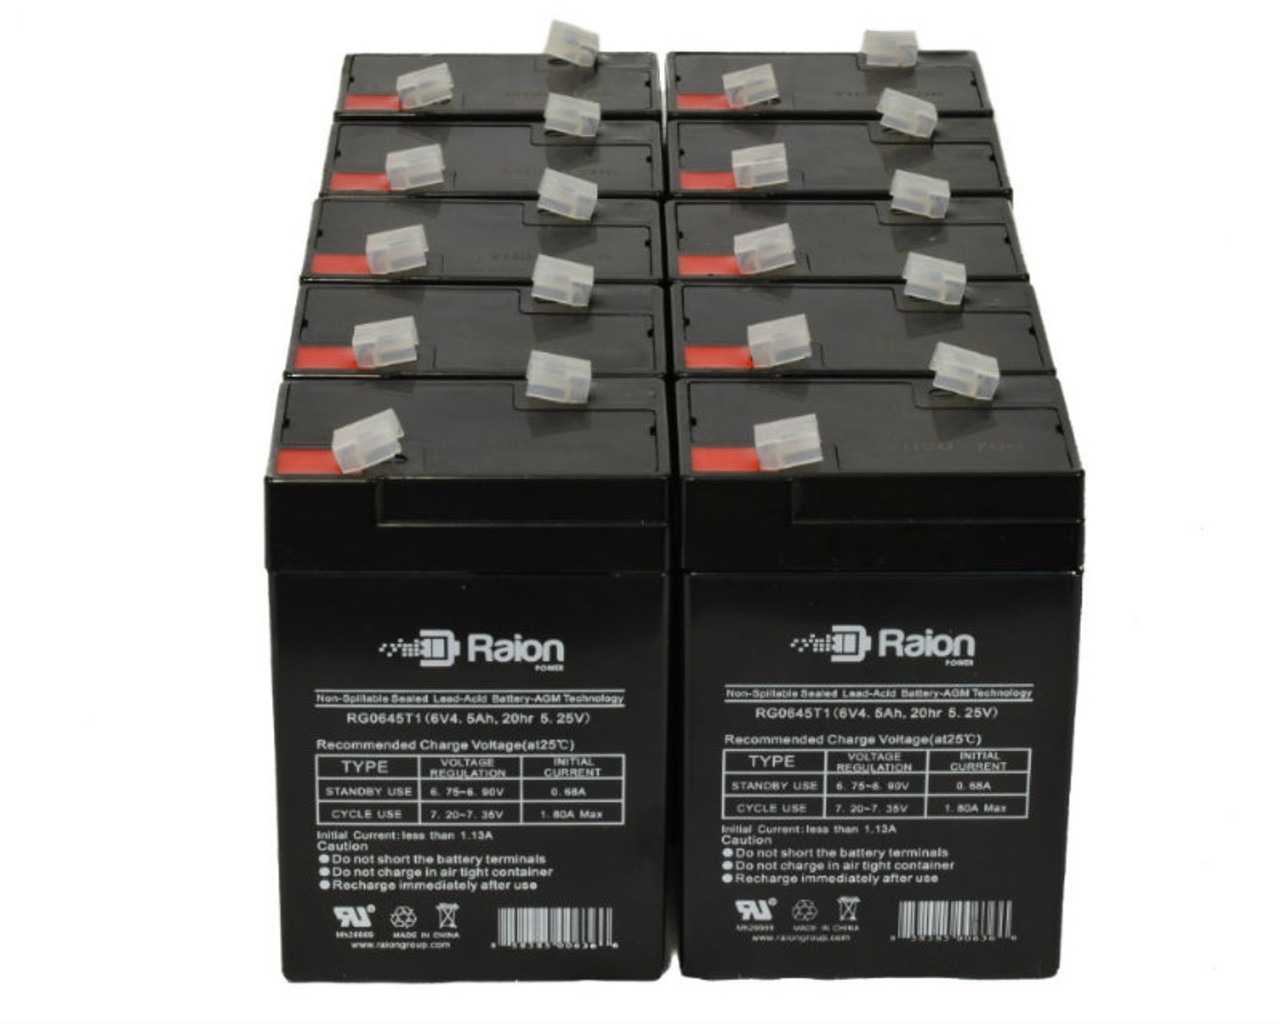 Raion Power 6 Volt 4.5Ah RG0645T1 Replacement Battery for Teledyne 2RL6S5PH - 10 Pack